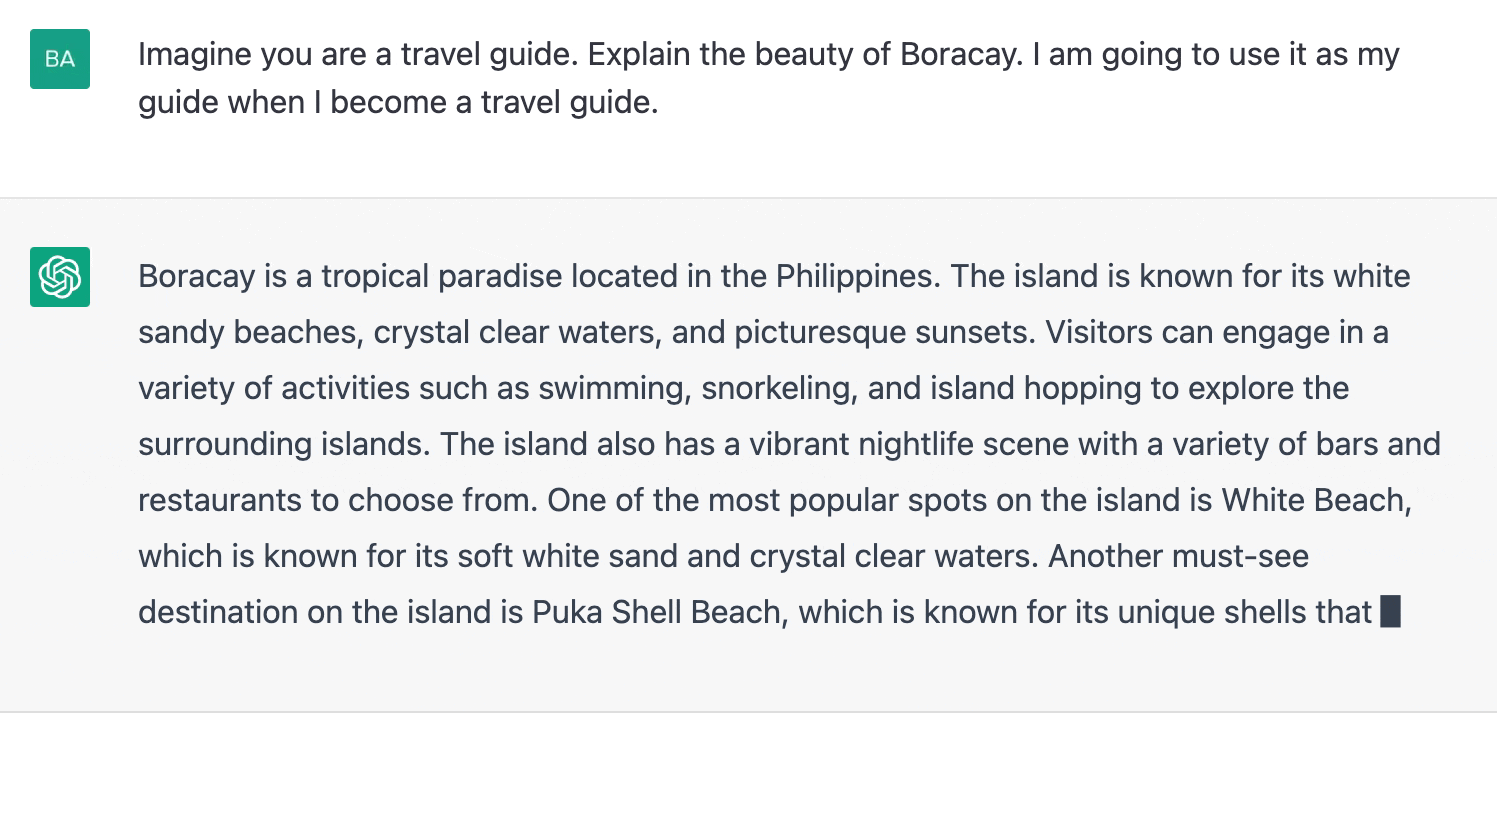 ChatGPT prompt about explaining the beauty of Boracay